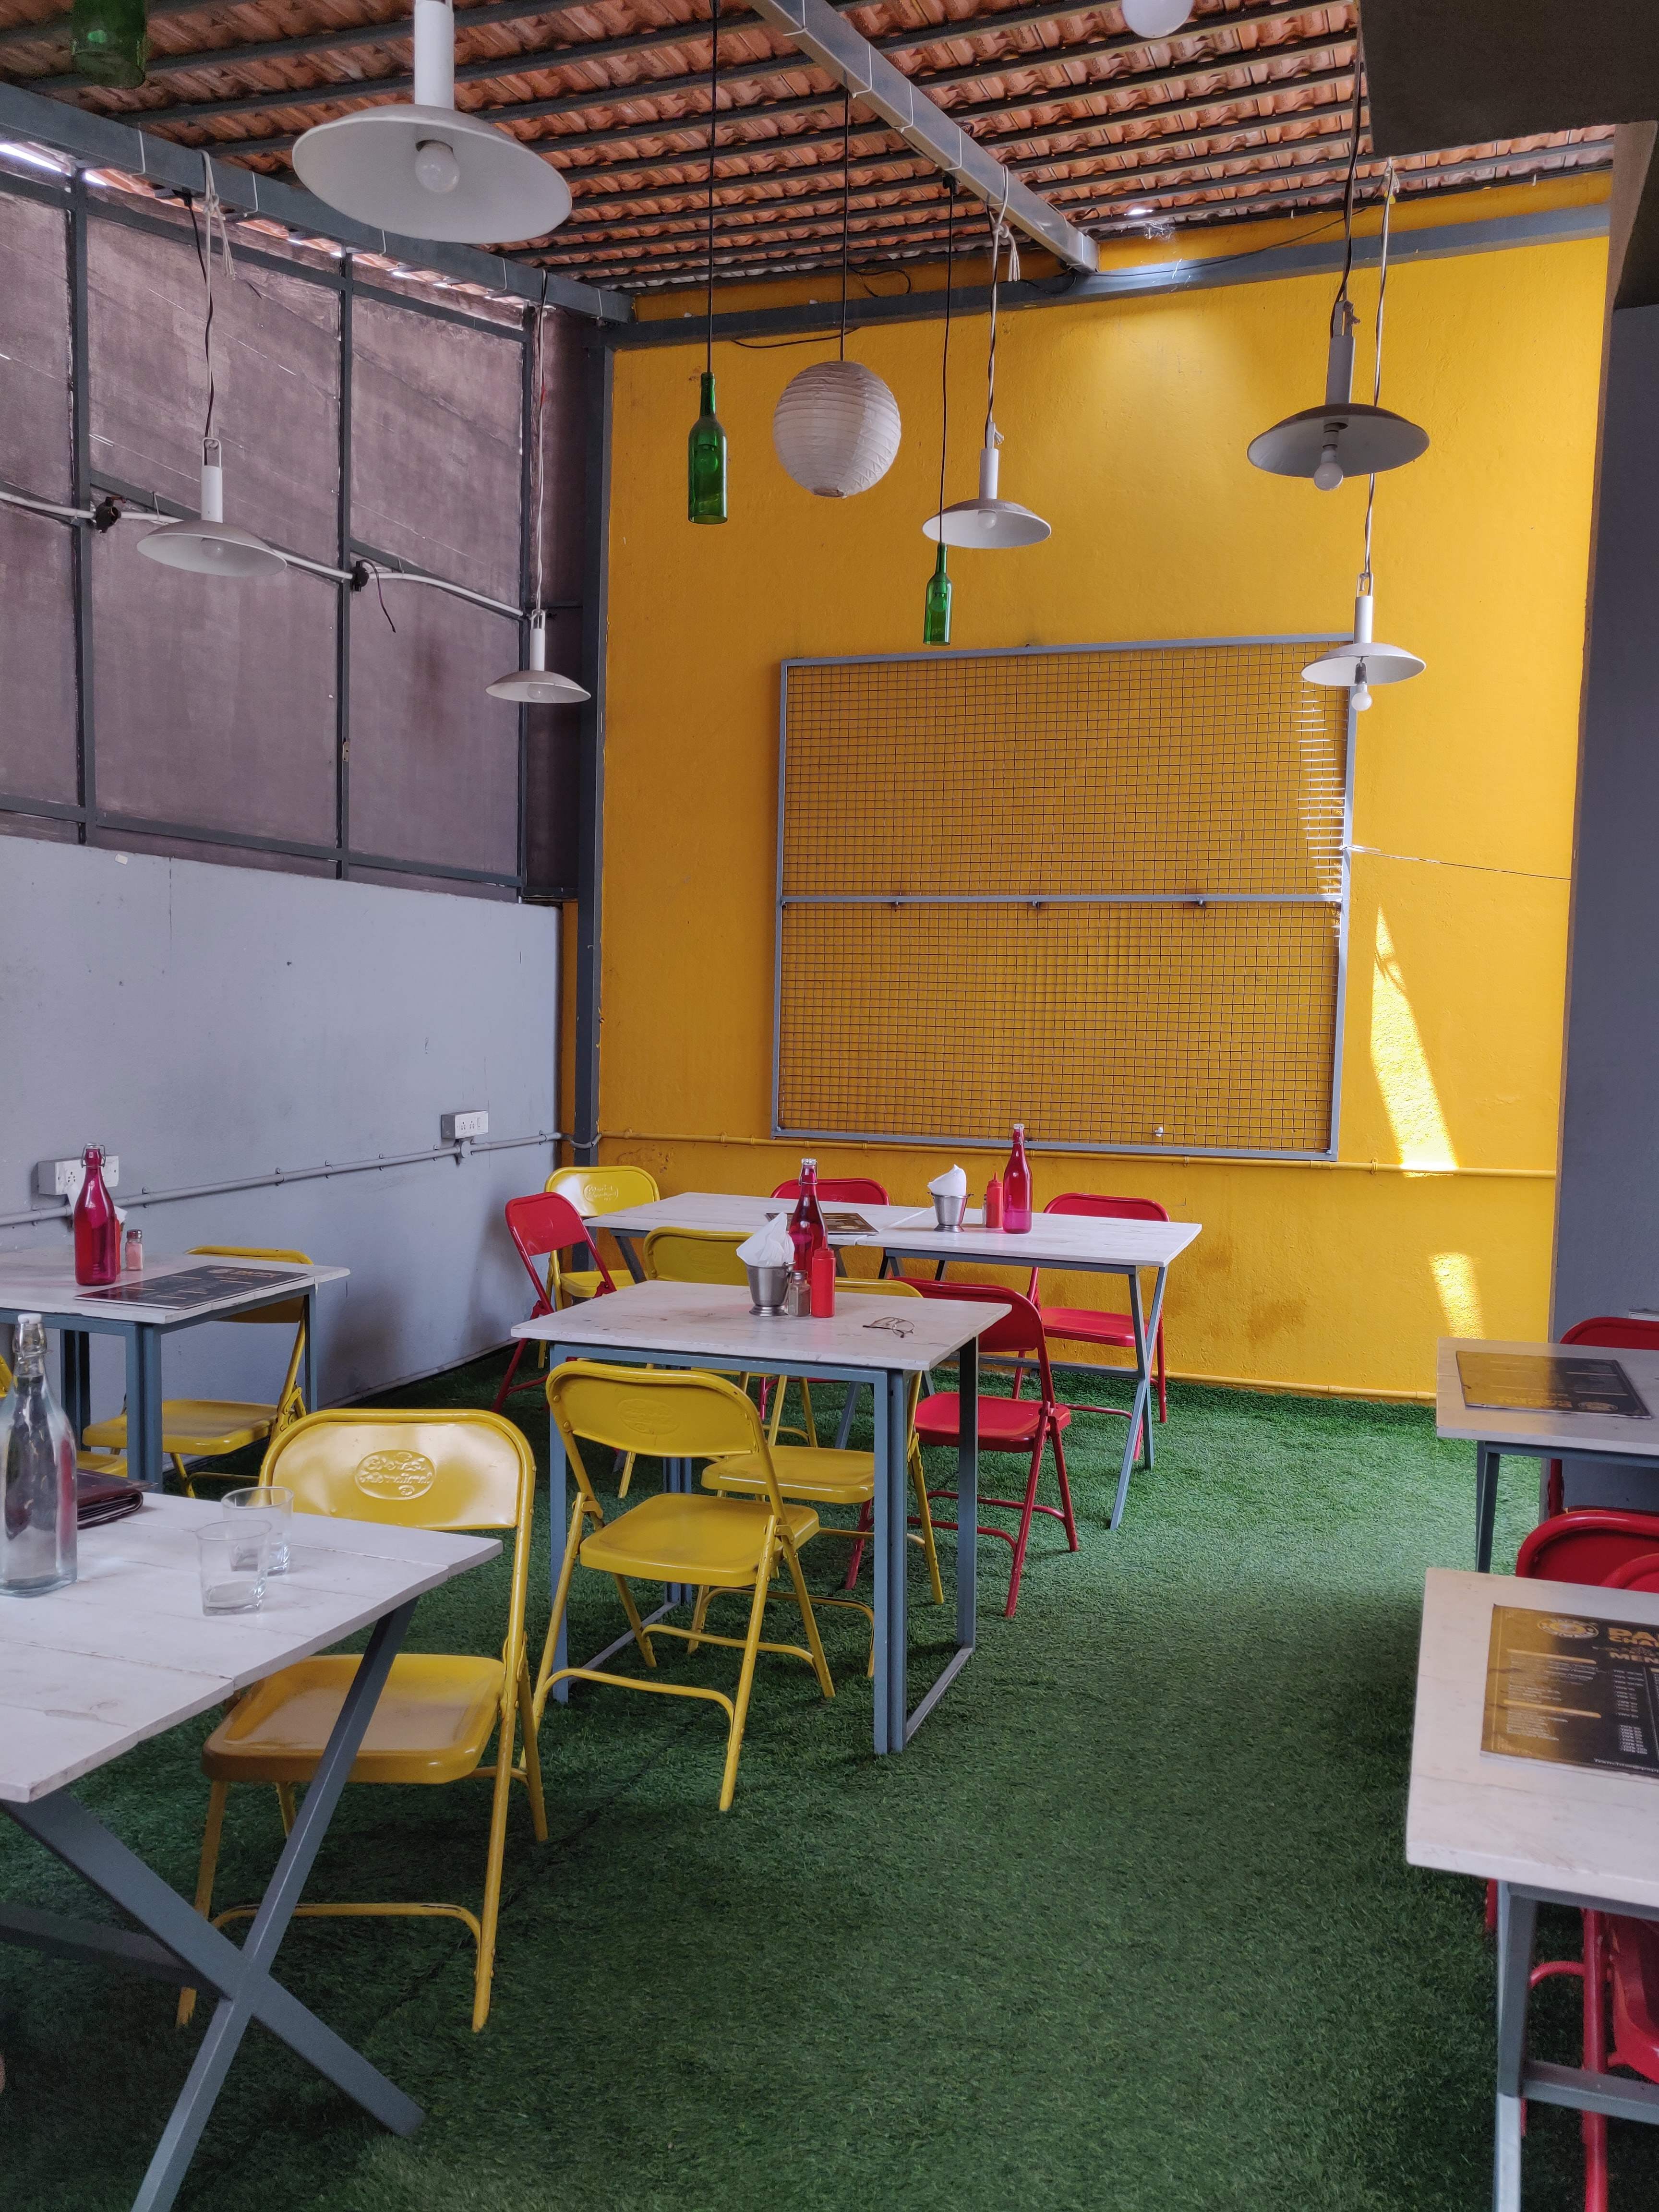 Room,Yellow,Table,Building,Furniture,Architecture,Interior design,House,Chair,Restaurant